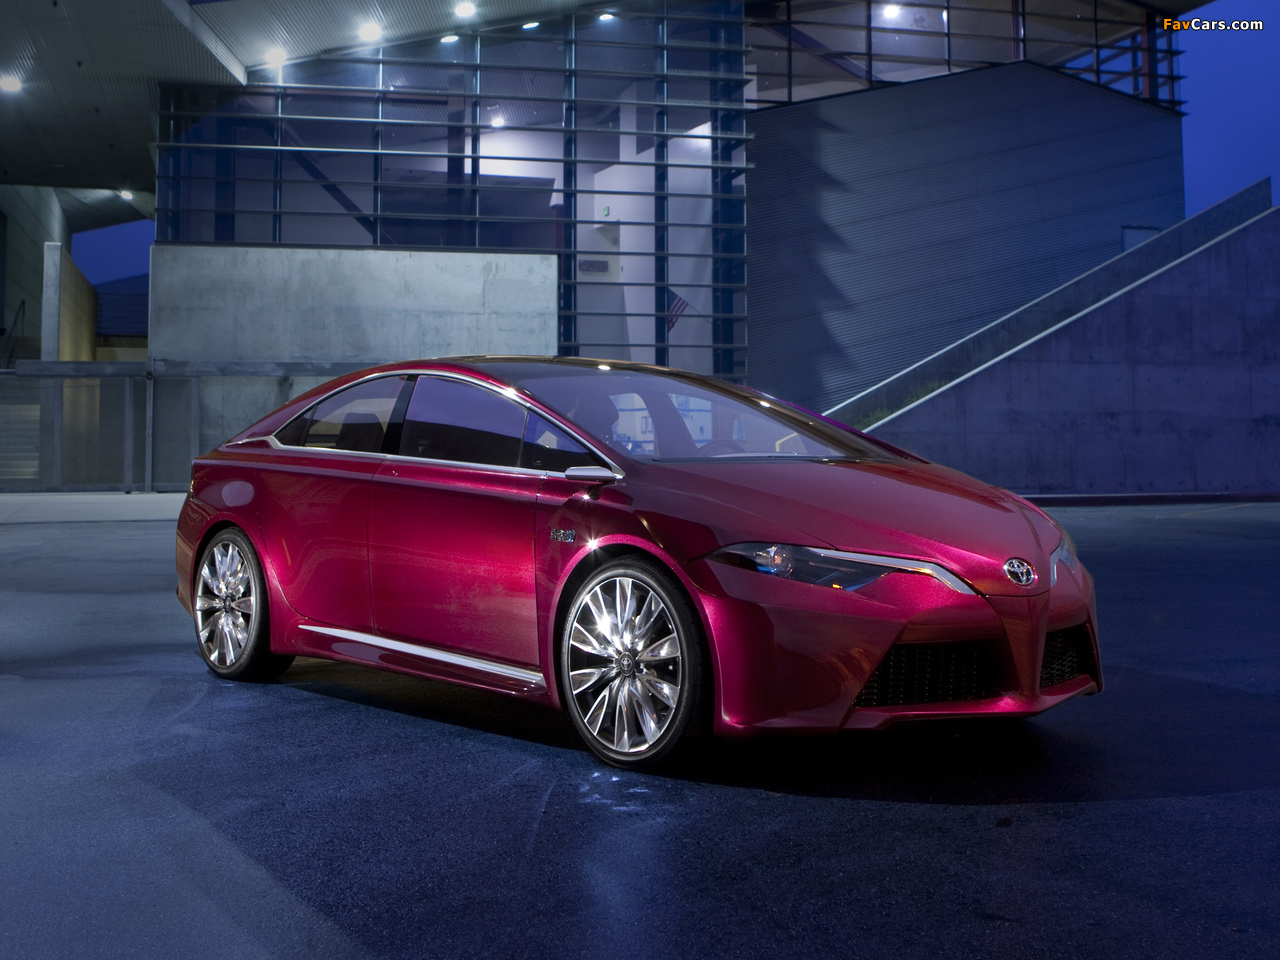 Pictures of Toyota NS4 Plug-in Hybrid Concept 2012 (1280 x 960)